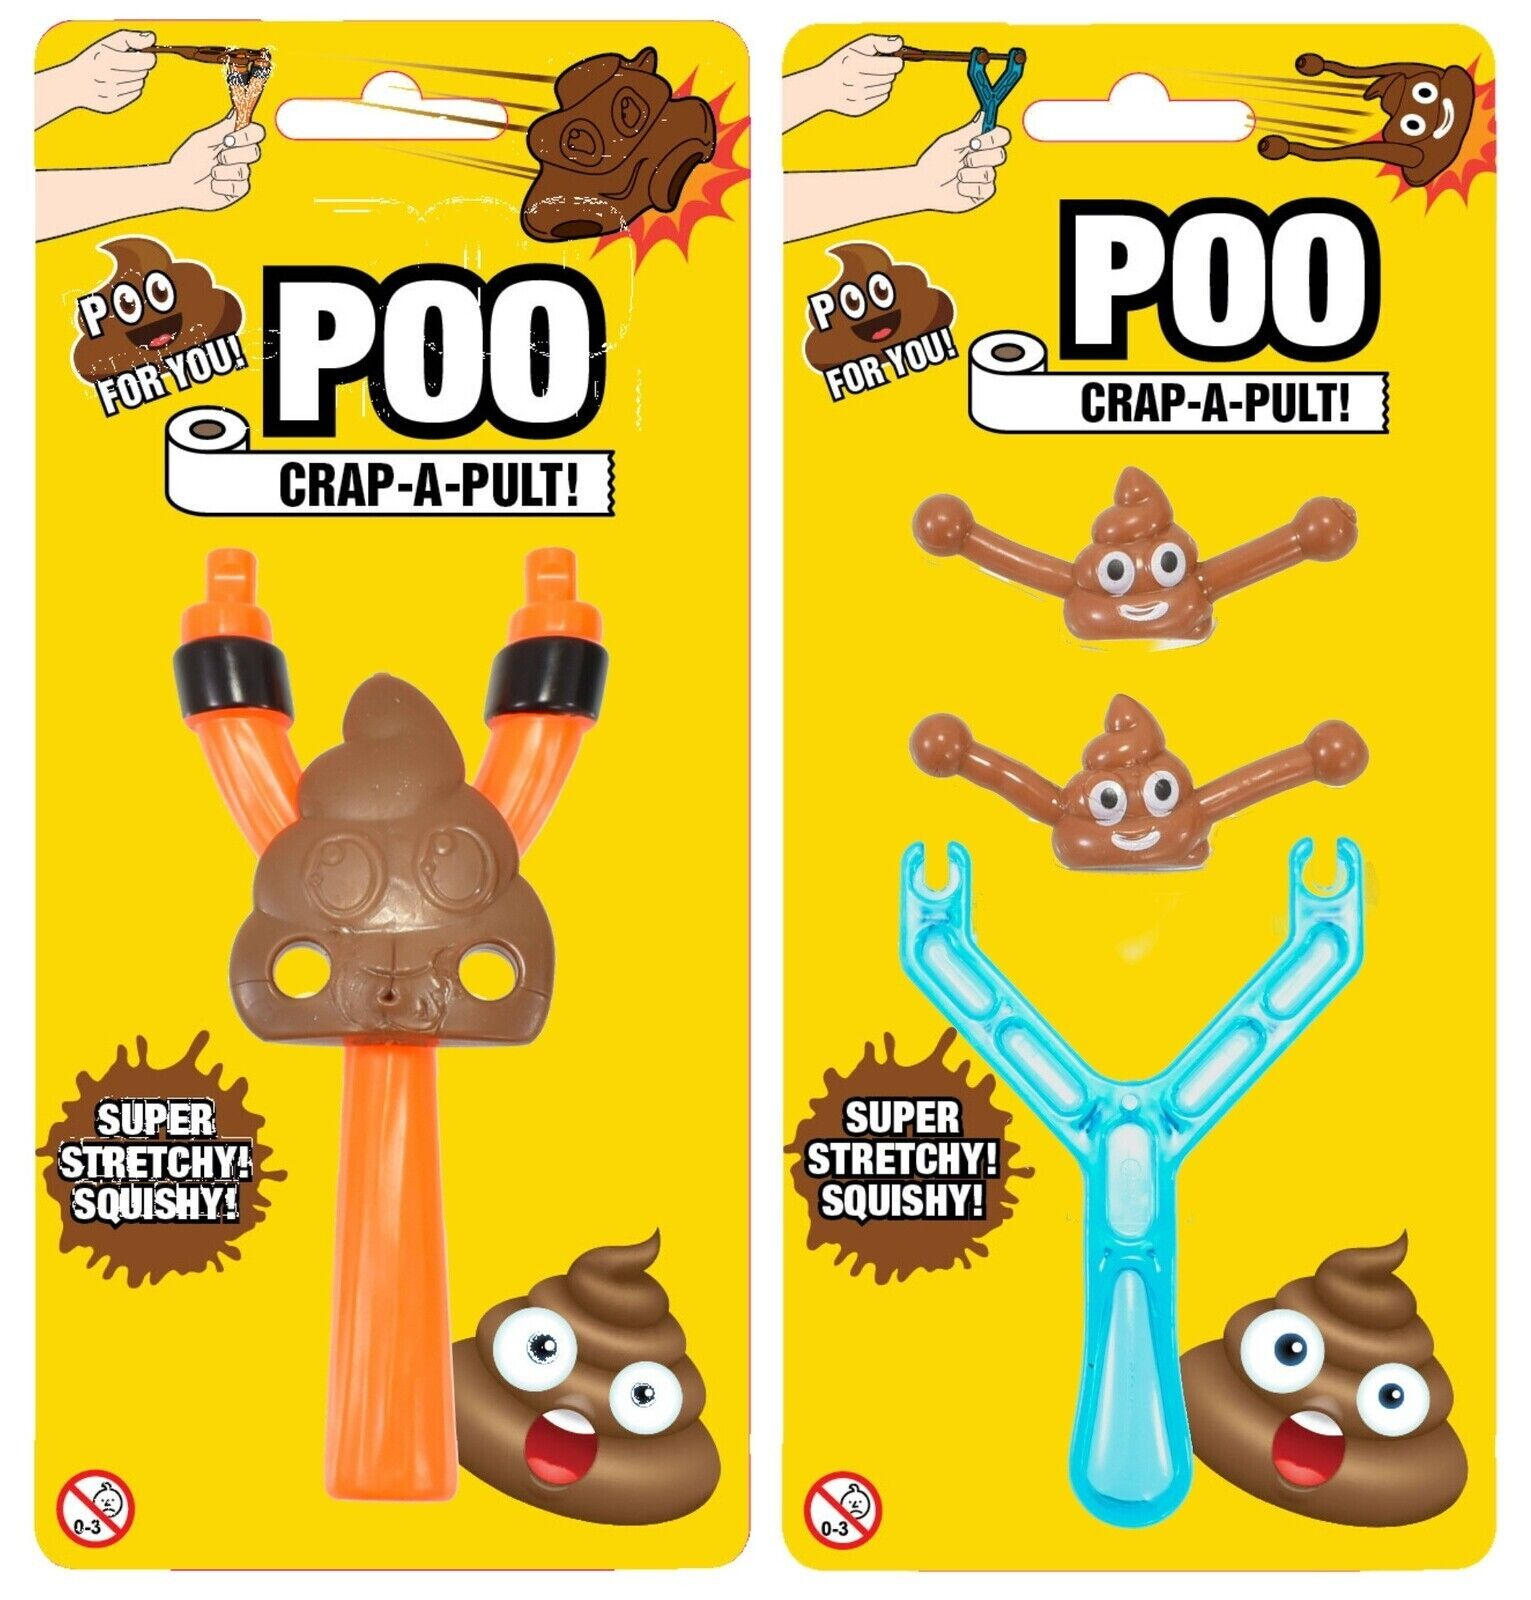 (🌲Early Christmas Sale- SAVE 48% OFF)Smiley Poo Slingshot-buy 5 get 5 free & free shipping(10pcs)